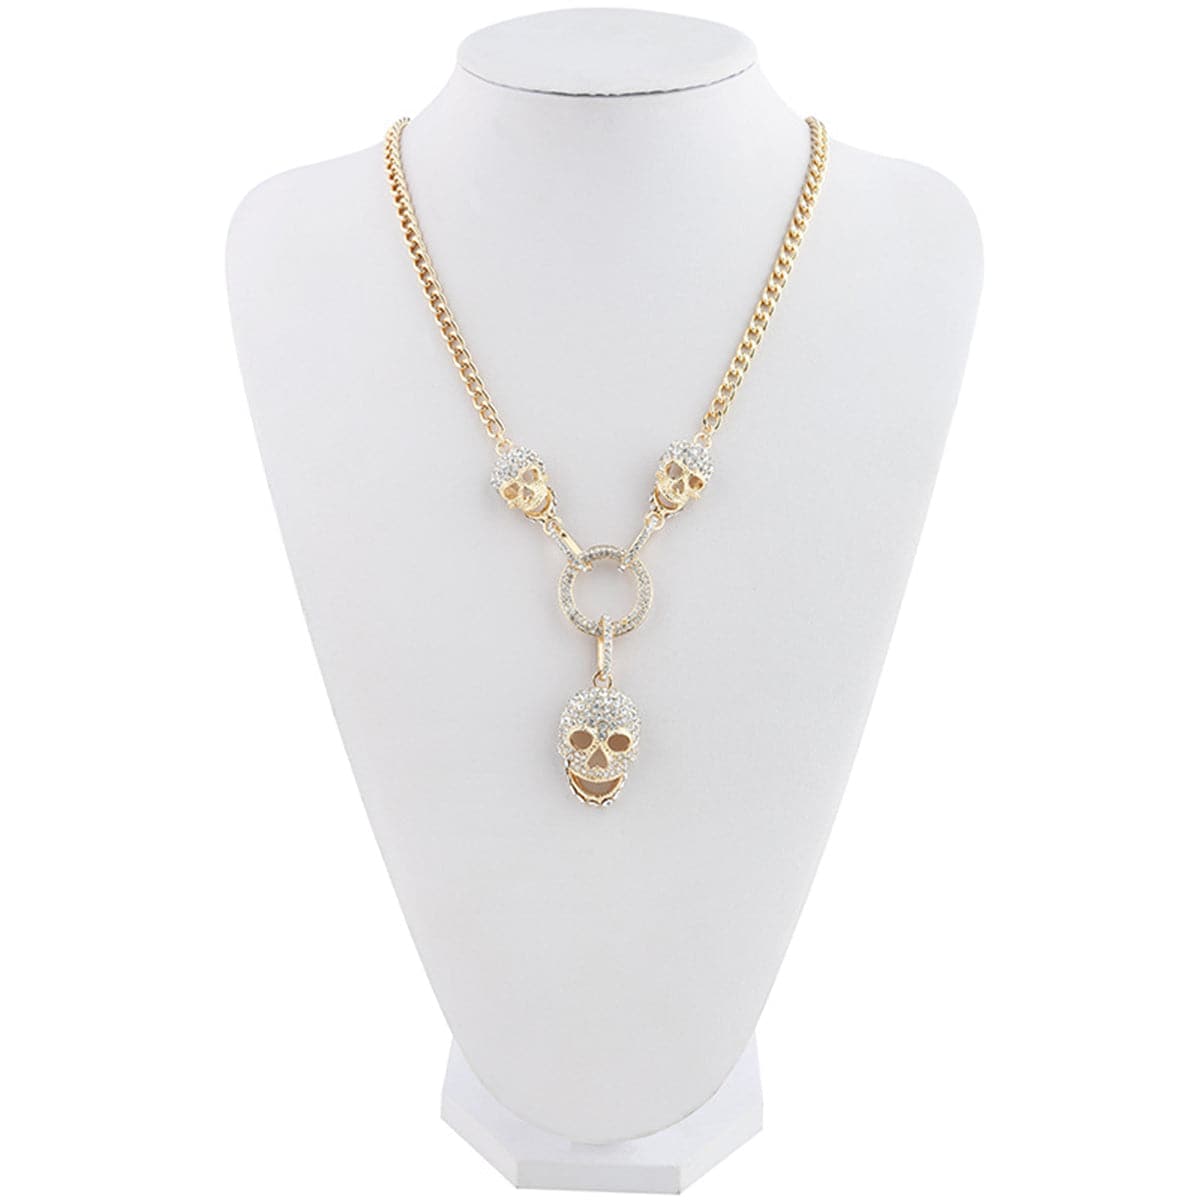 Cubic Zirconia & 18K Gold-Plated Triple Skull & Ring Pendant Necklace